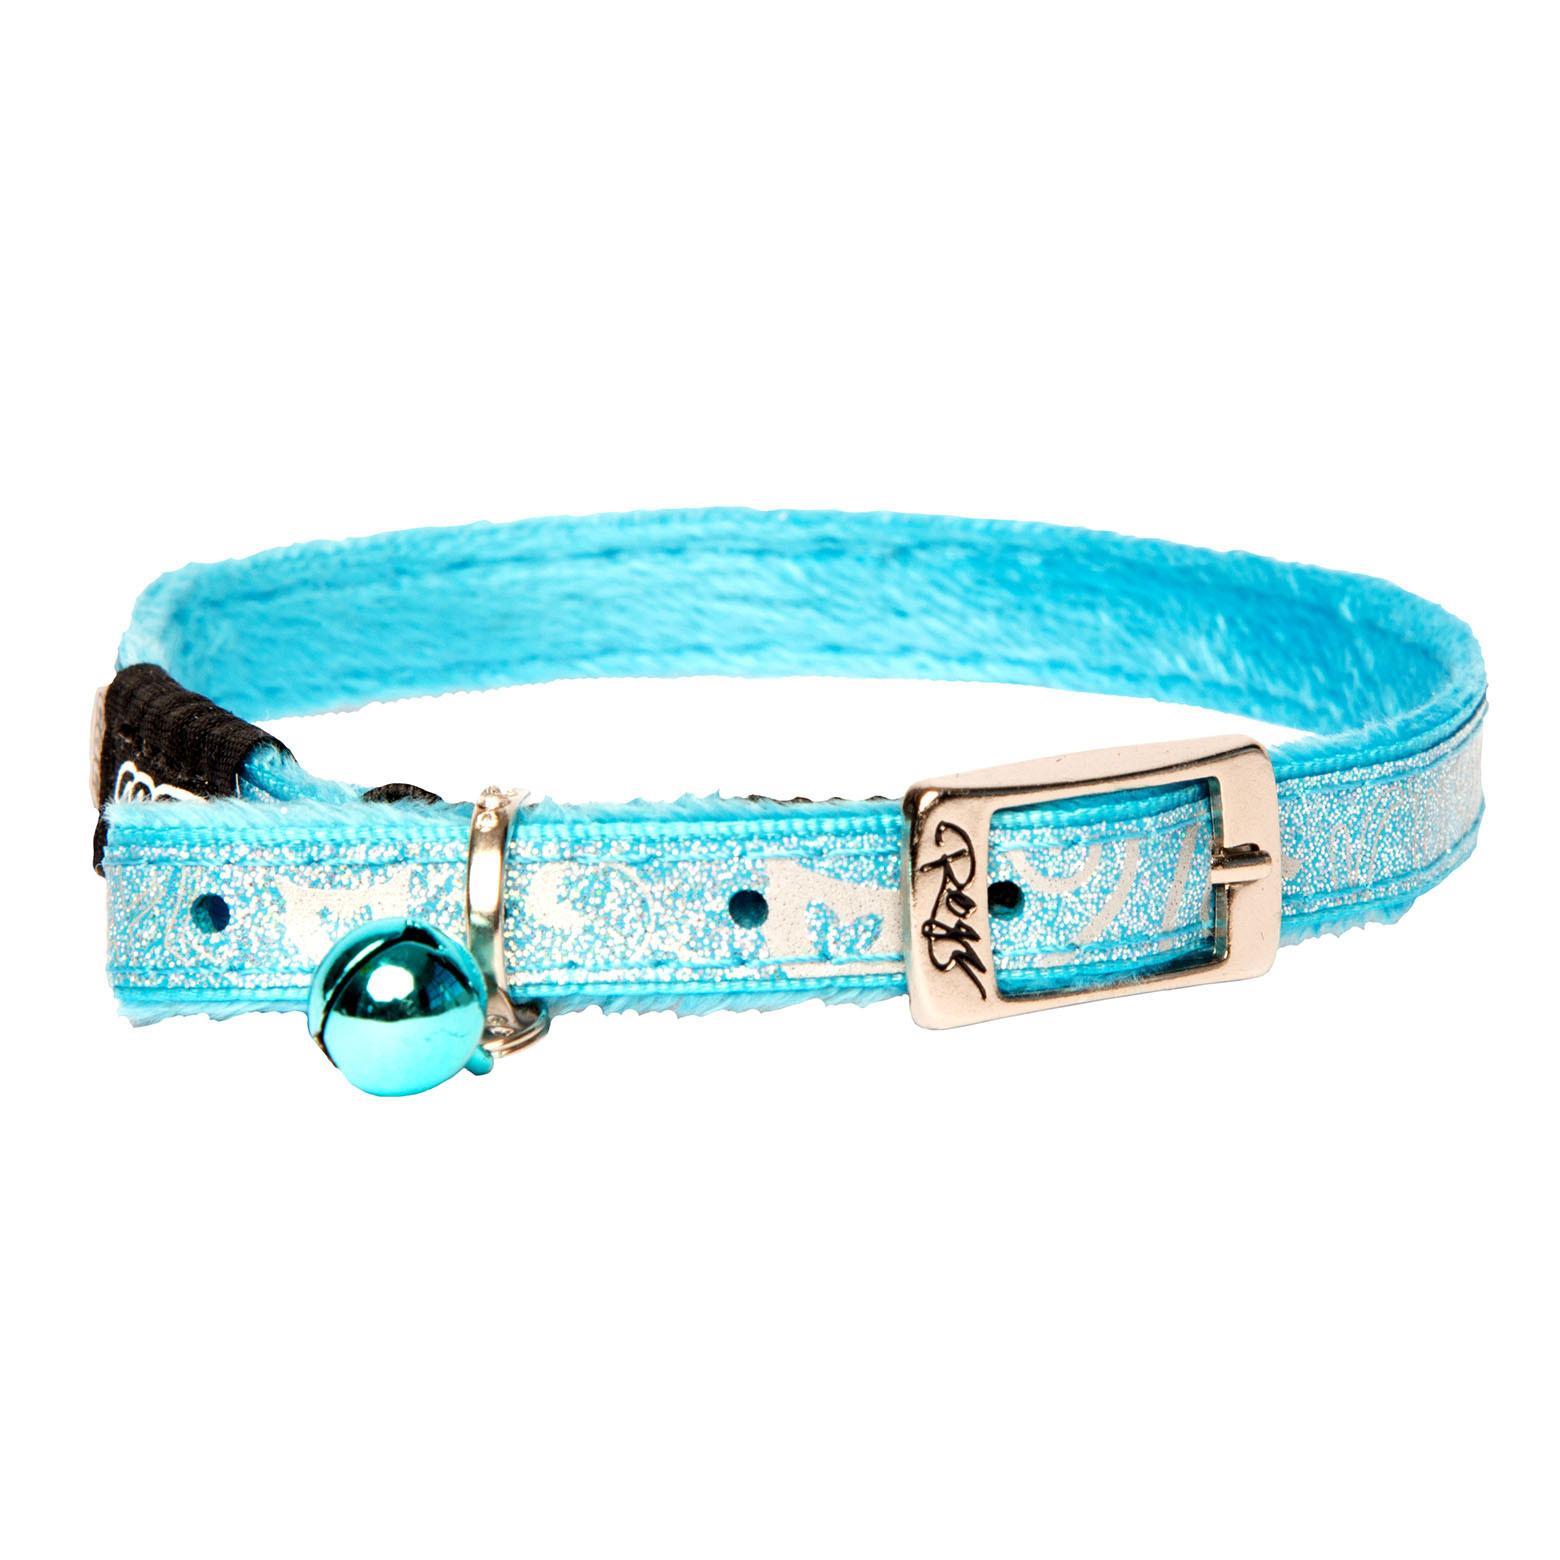 Rogz Sparklecat Pin Buckle Reflective Cat Collar Turquoise Small 11mm